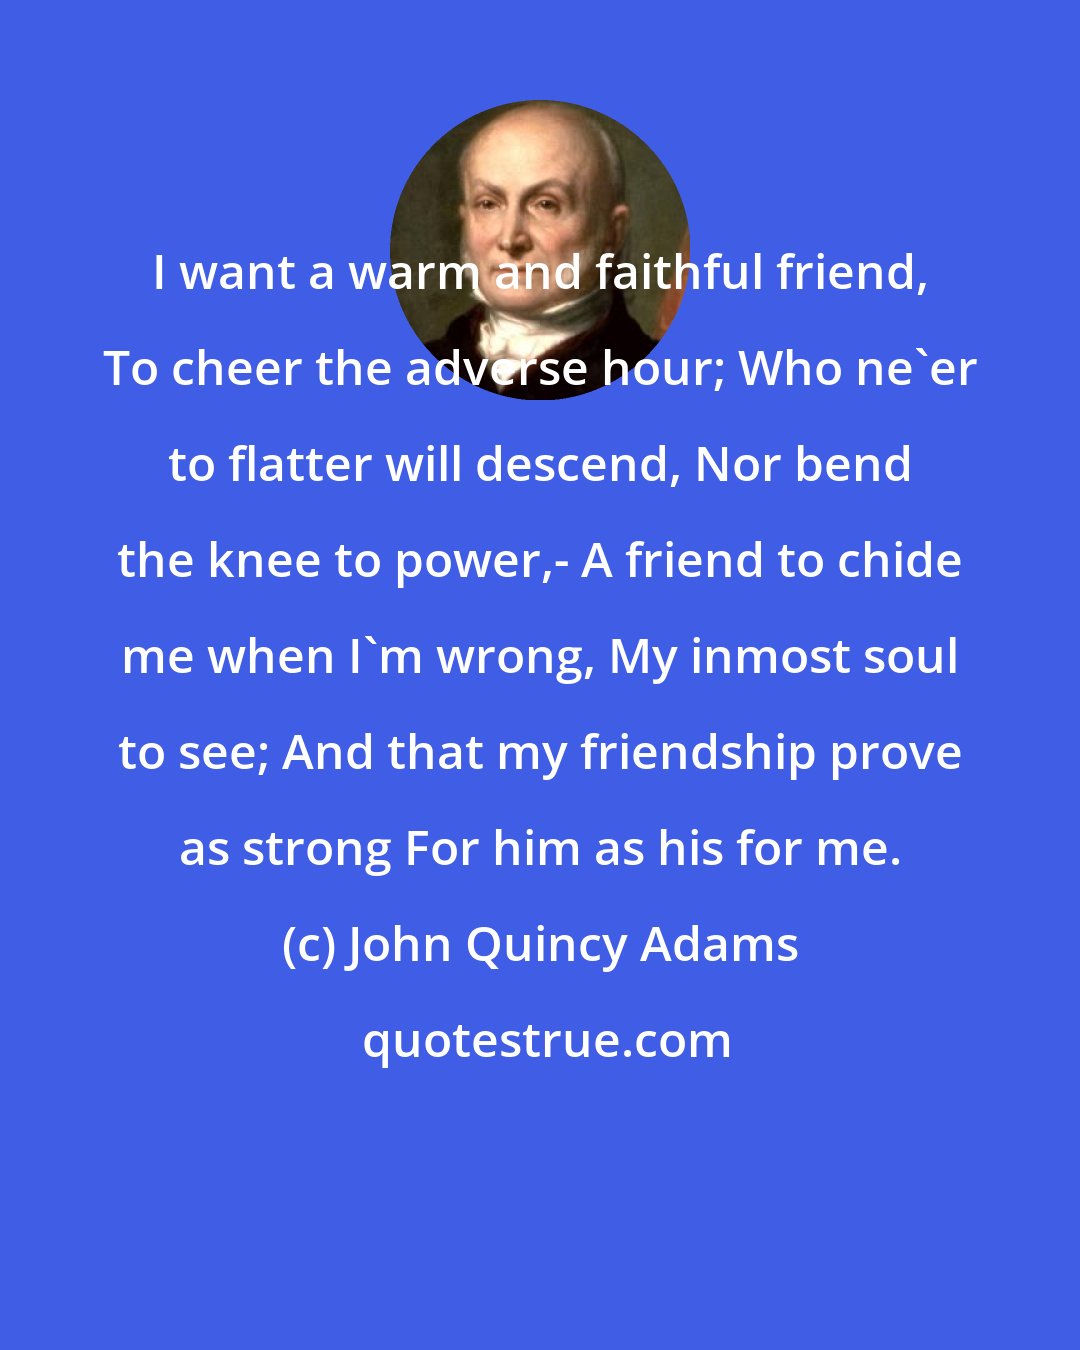 John Quincy Adams: I want a warm and faithful friend, To cheer the adverse hour; Who ne'er to flatter will descend, Nor bend the knee to power,- A friend to chide me when I'm wrong, My inmost soul to see; And that my friendship prove as strong For him as his for me.